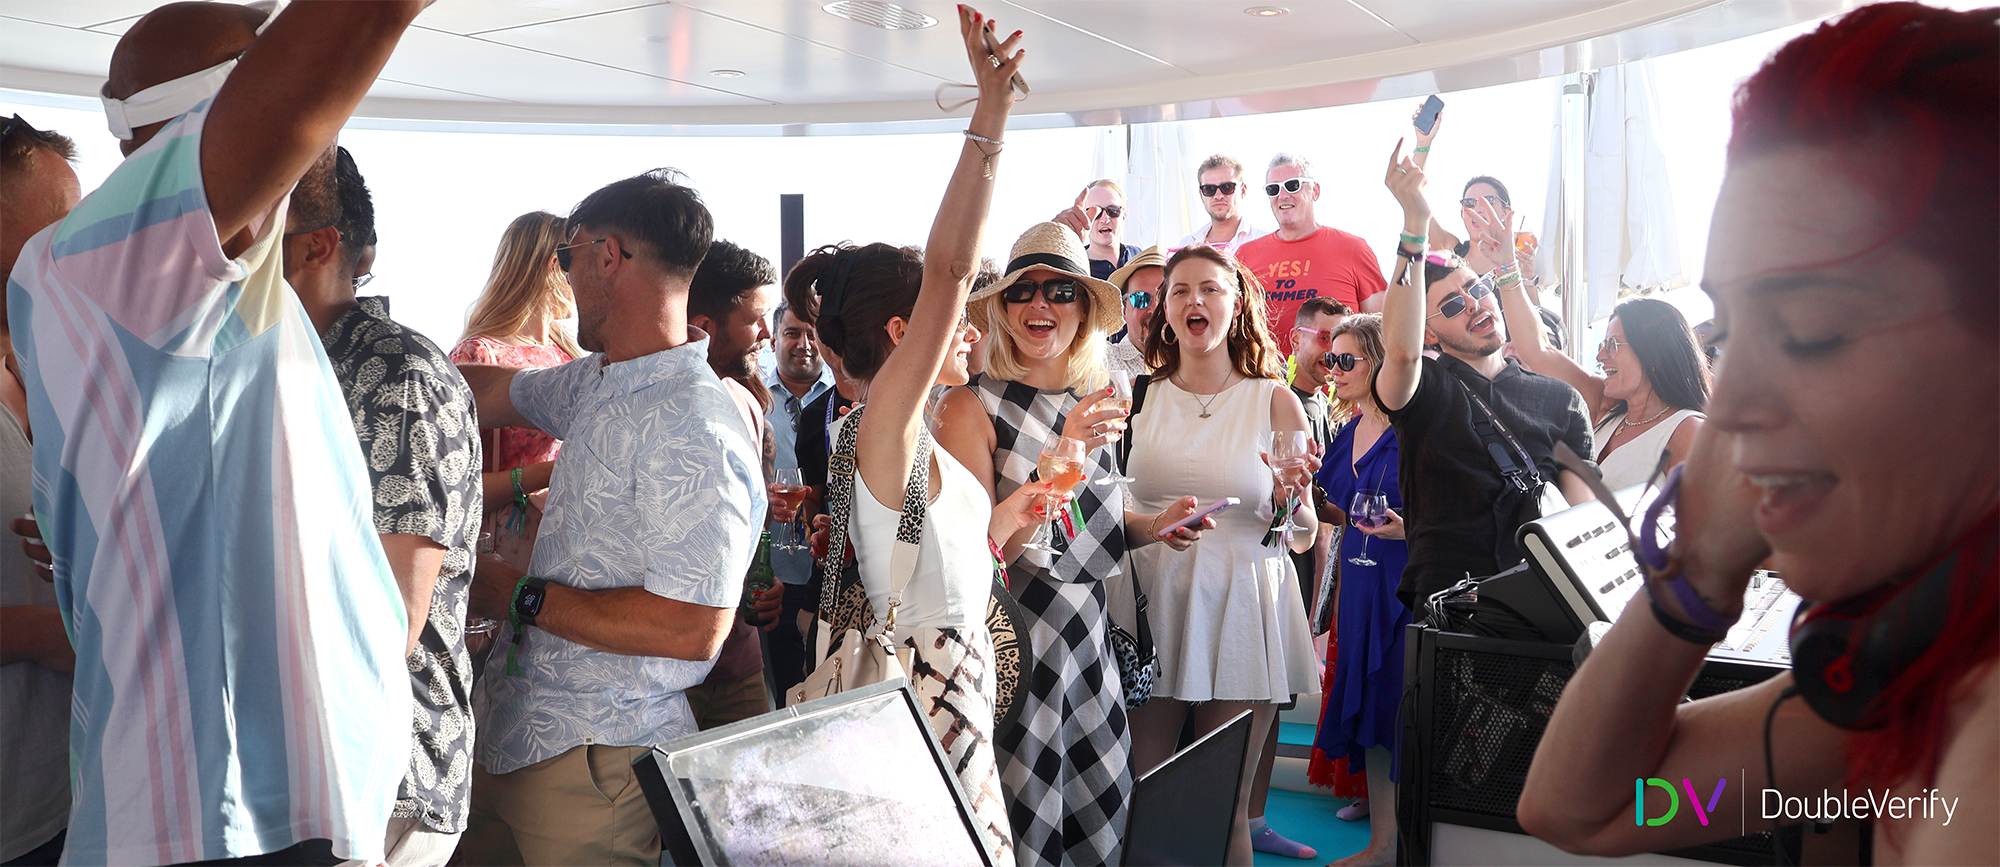 Photo taken on DV's yacht at the 2024 Cannes Lions International Festival of Creativity showing a large group of guests dancing and laughing with drinks in their hands. In the corner, you can see the DJ holding headphones to her ear.